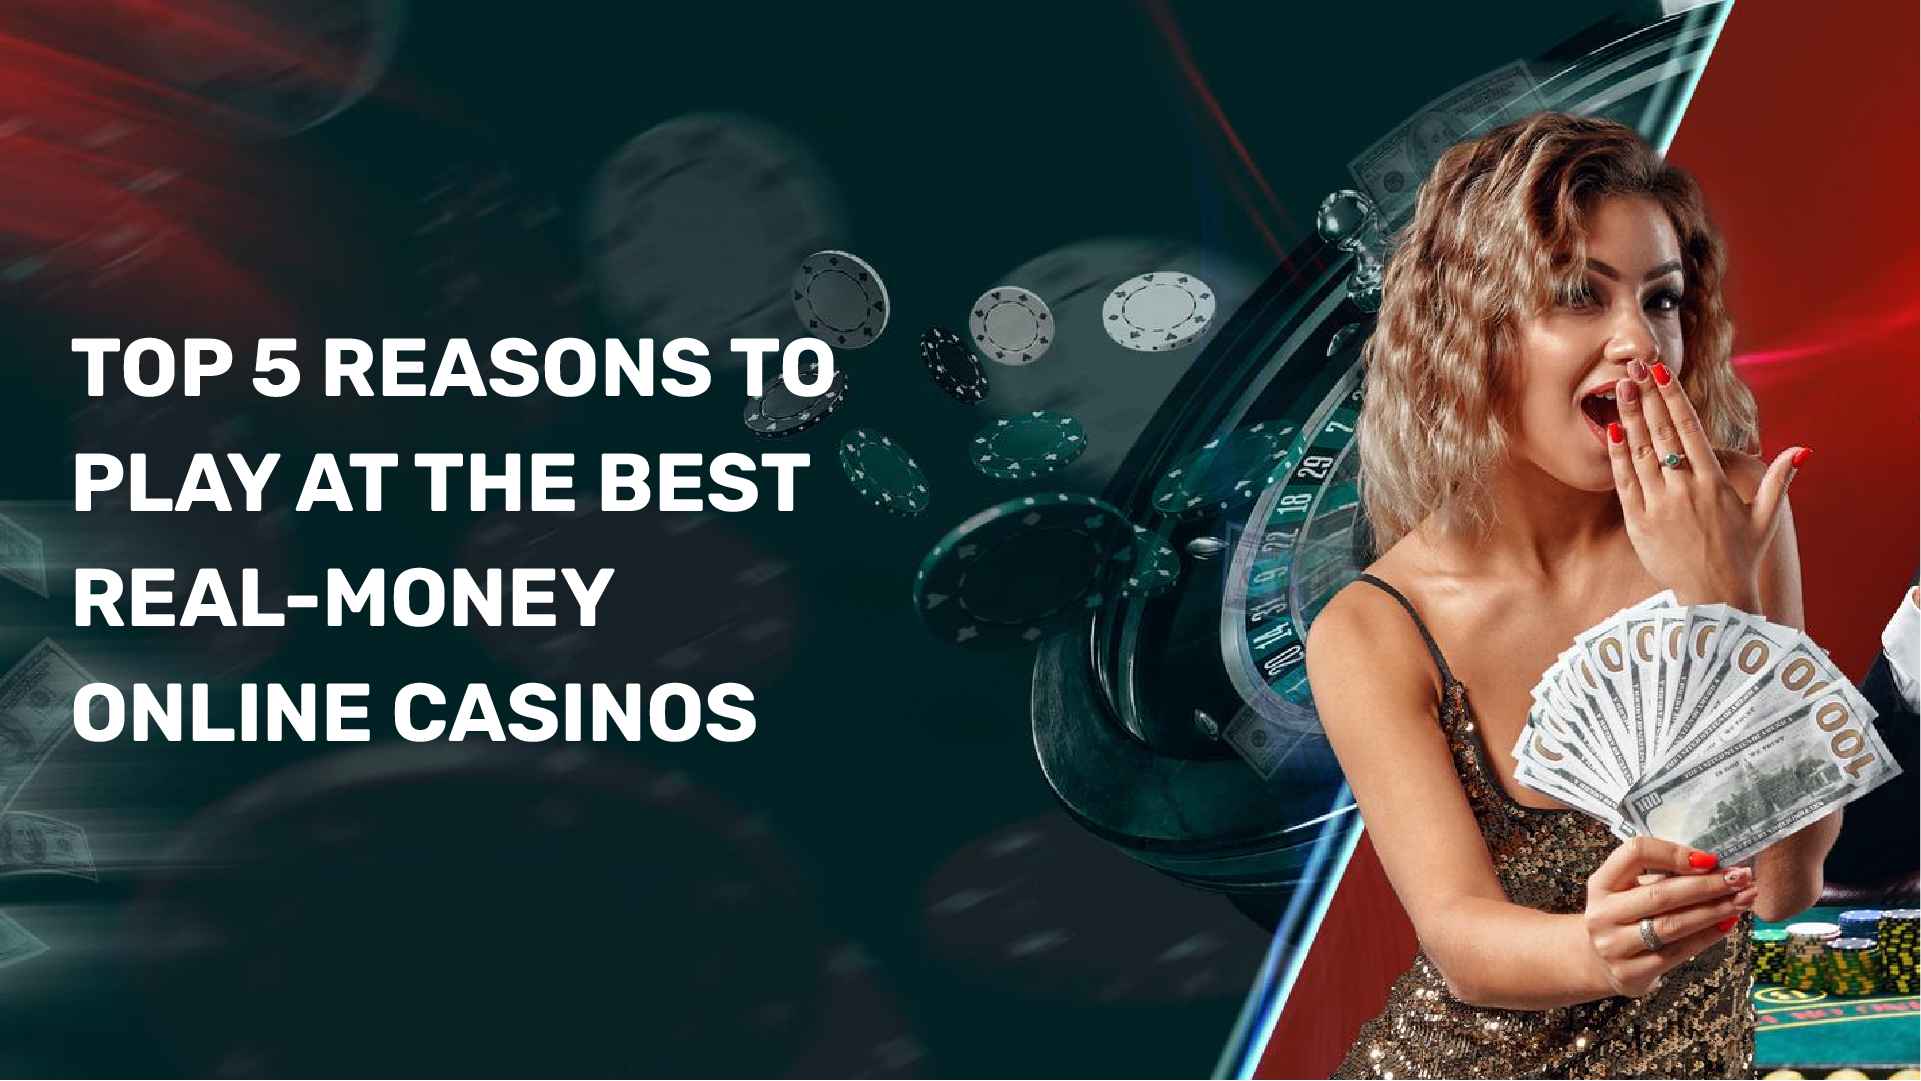 TOP 5 REASONS TO PLAY AT THE BEST REAL-MONEY ONLINE CASINOS_11zon